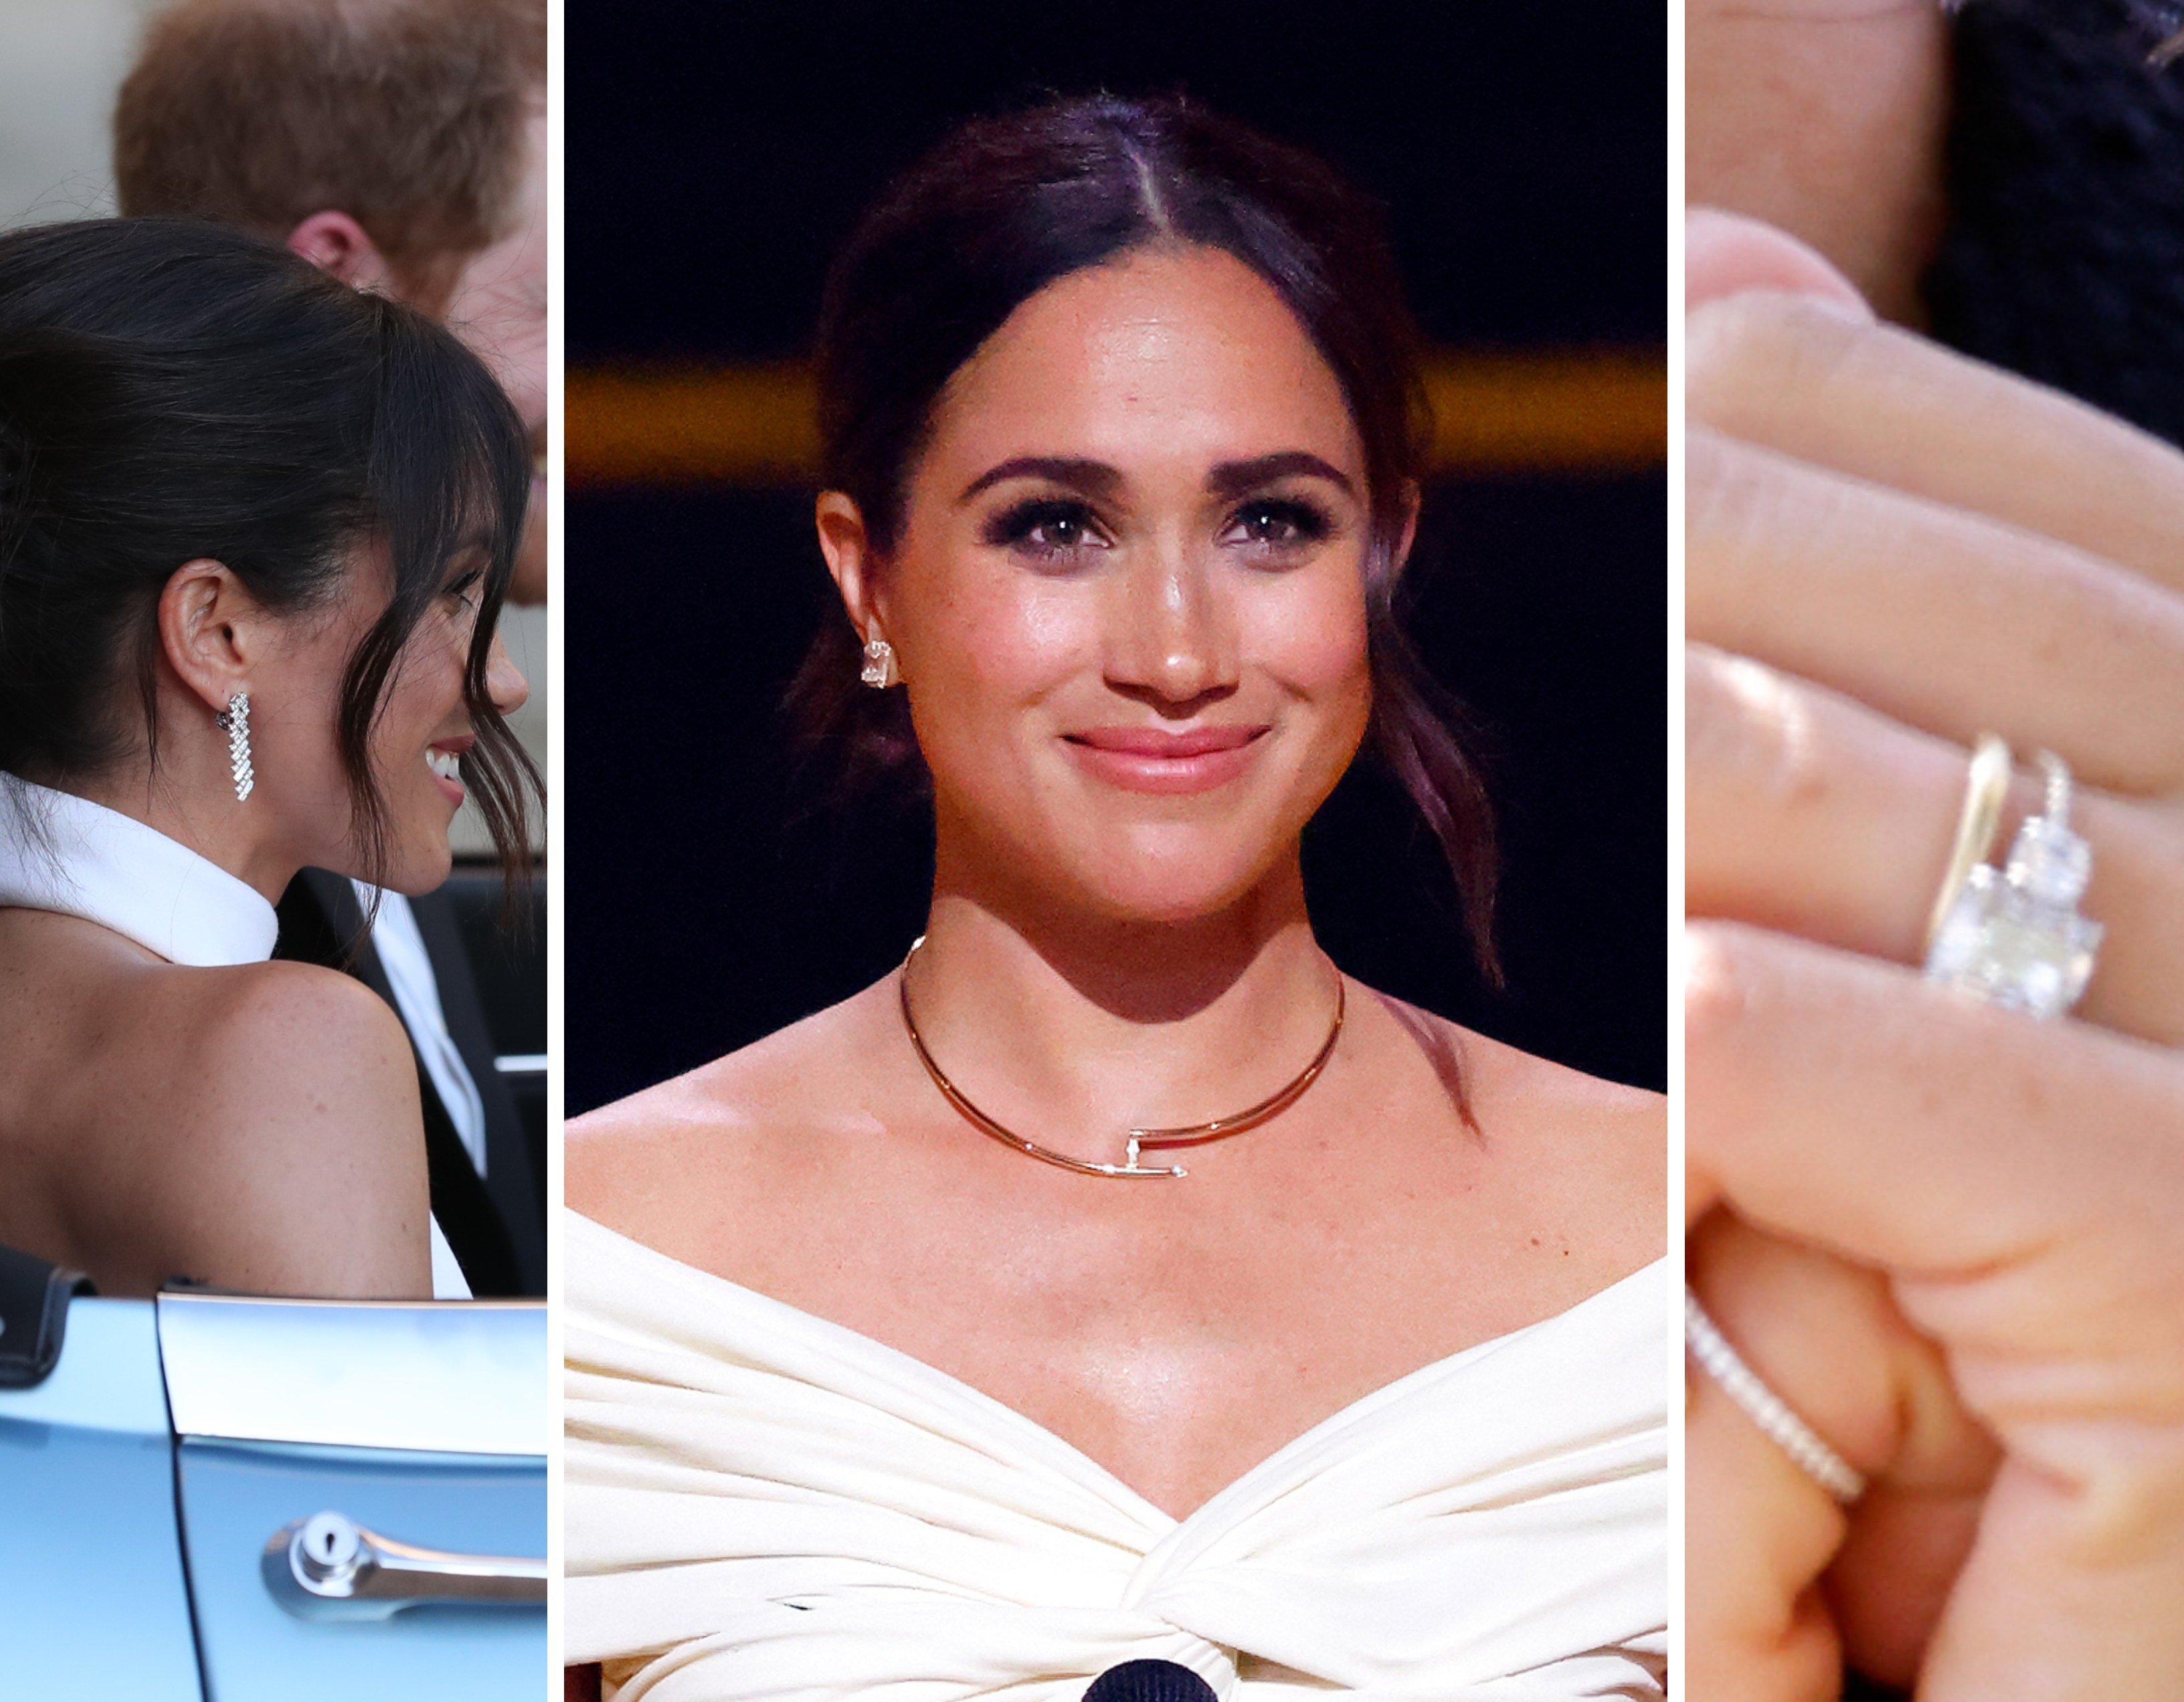 Meghan Markle’s jewellery collection features plenty of classic Cartier – but what else? Photo: Getty